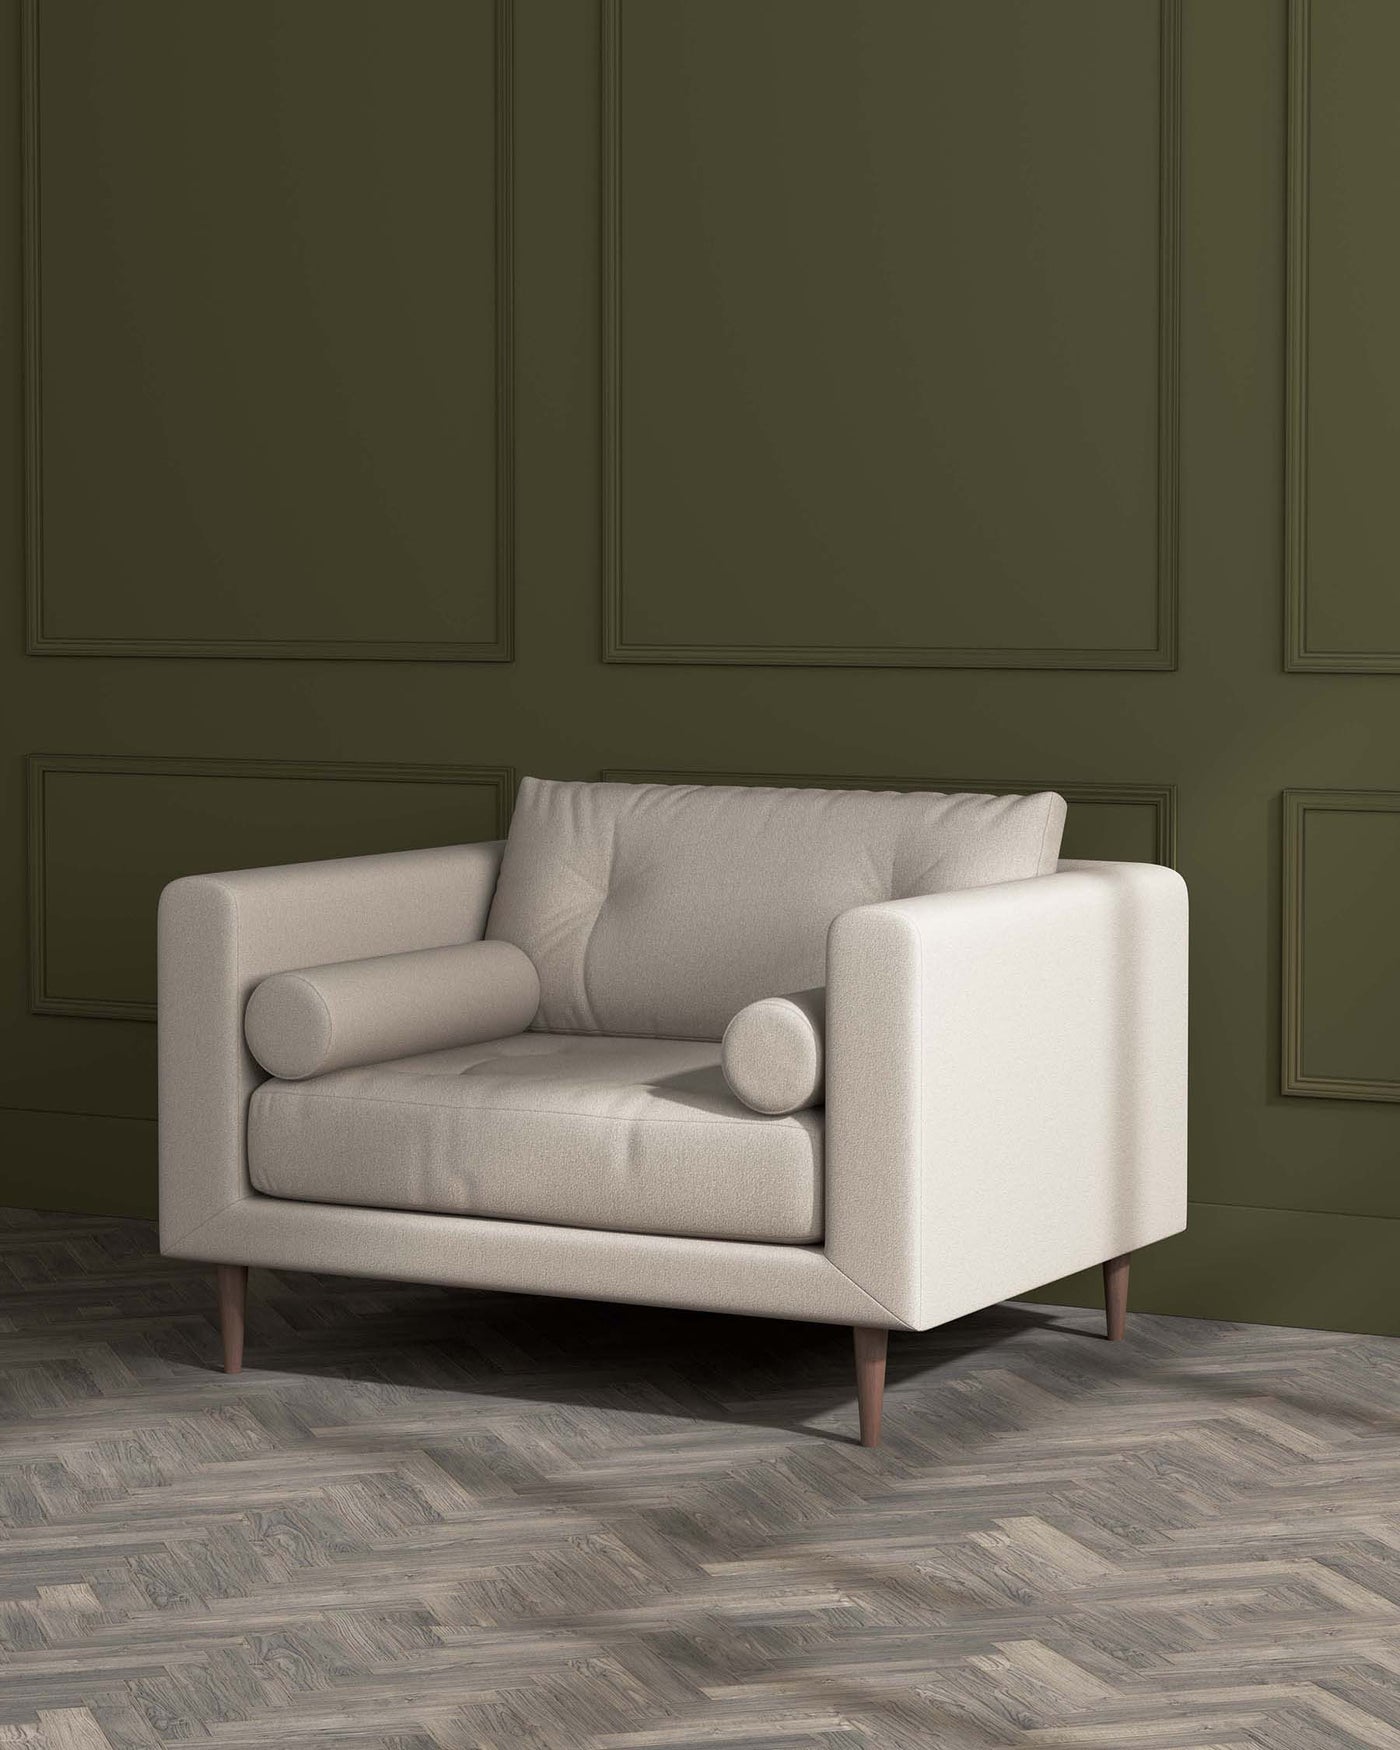 Modern beige fabric loveseat with a minimalist design, featuring clean lines, cushioned arms, and cylindrical cushions, supported by tapered wooden legs, against an olive green panelled wall on a herringbone-patterned wooden floor.